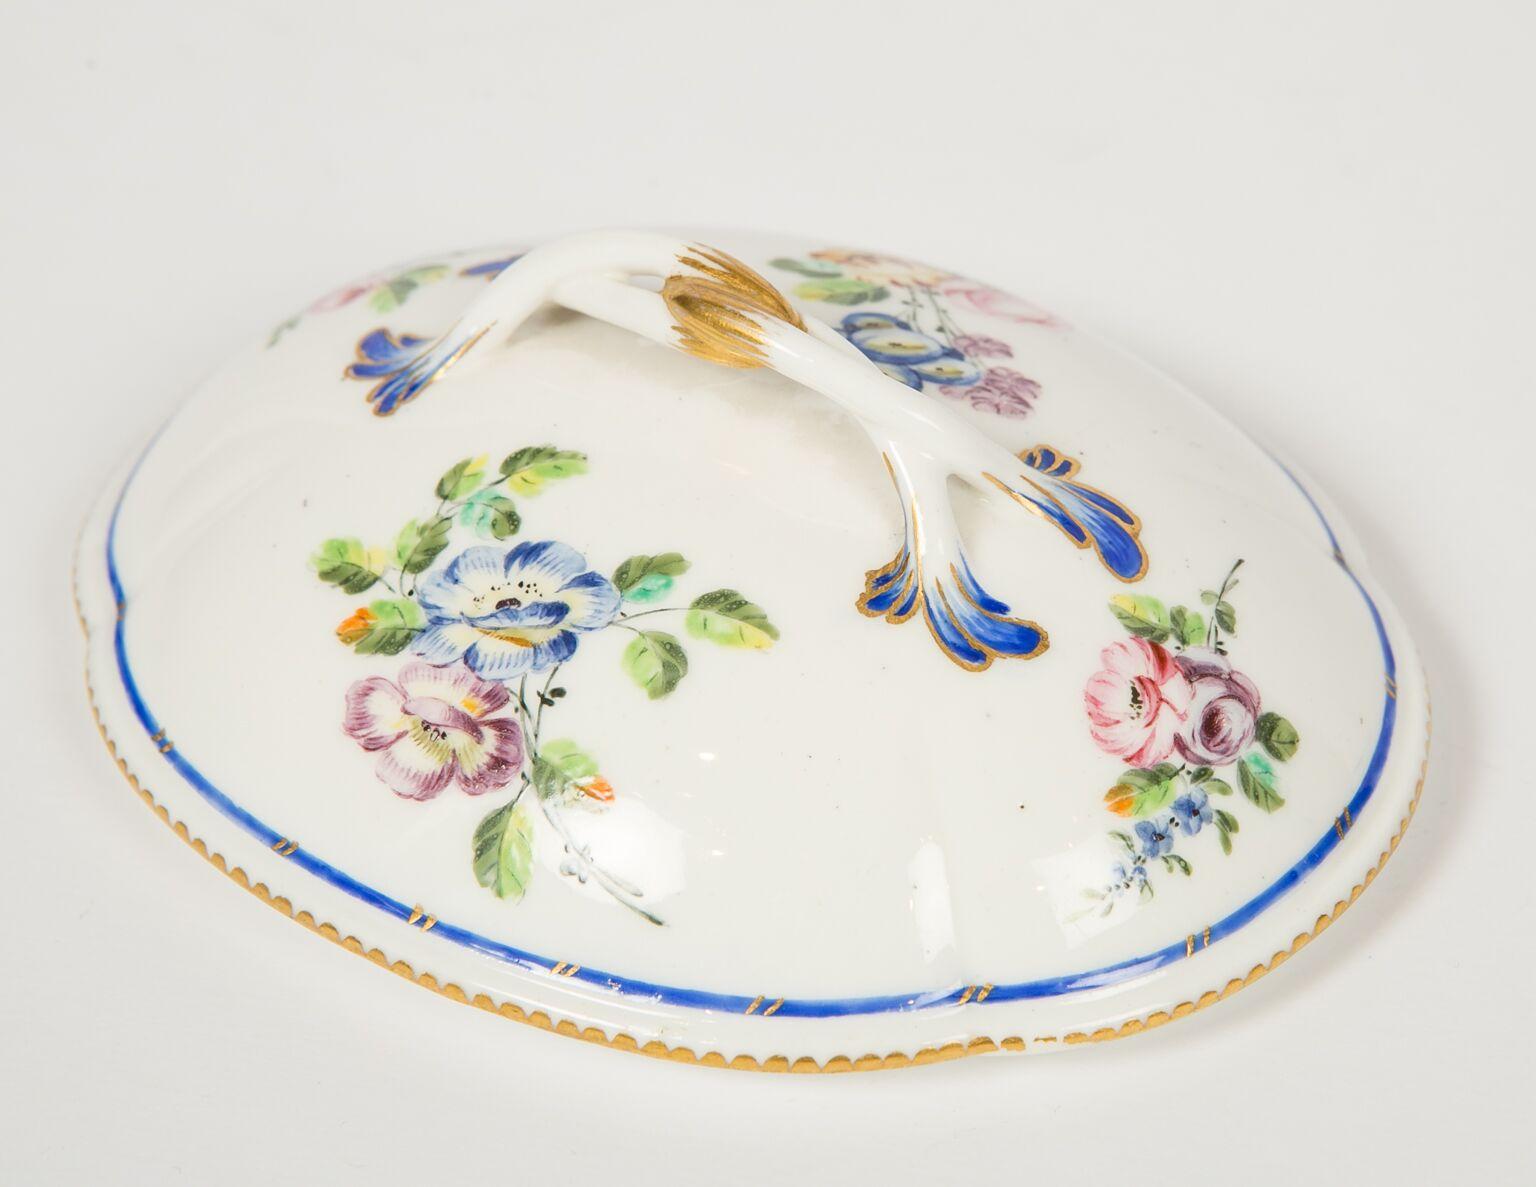 WHY WE LOVE IT: Who wouldn't?
Sèvres* made the finest French porcelains. We are delighted to offer this hand-painted Sèvres soft-paste porcelain bowl decorated with exquisite flowers and leaves. The detailed painting is extraordinary. Notice the